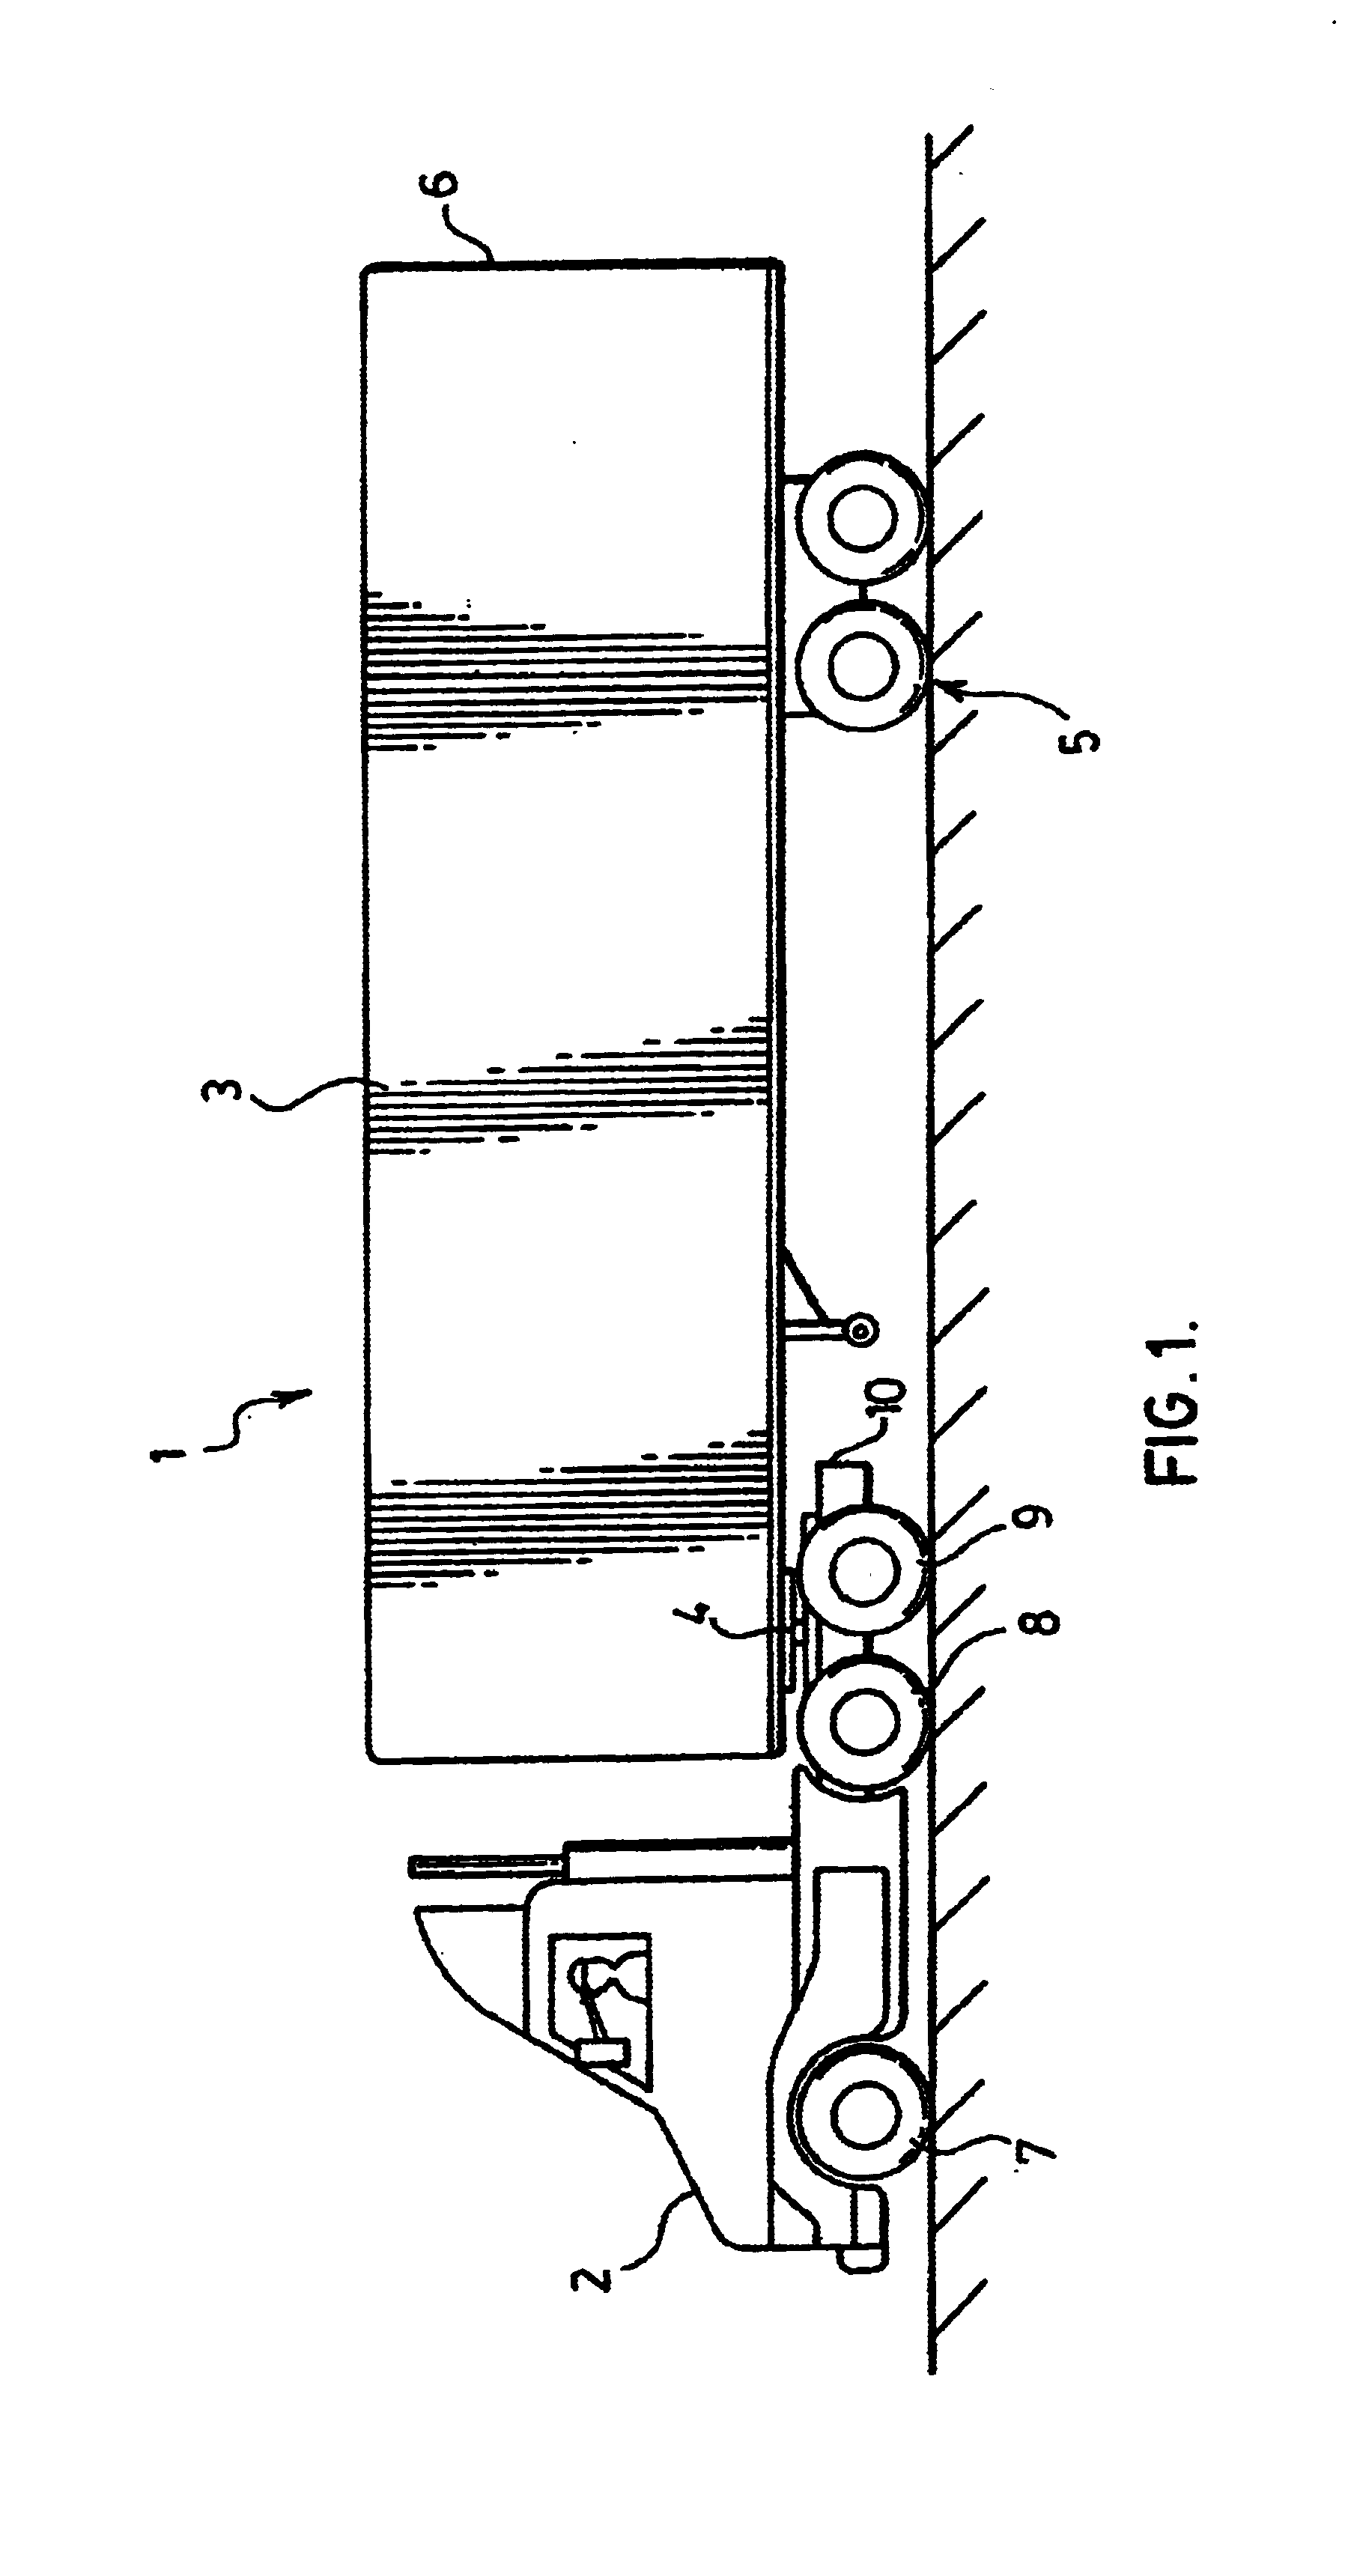 Axle weight distribution system